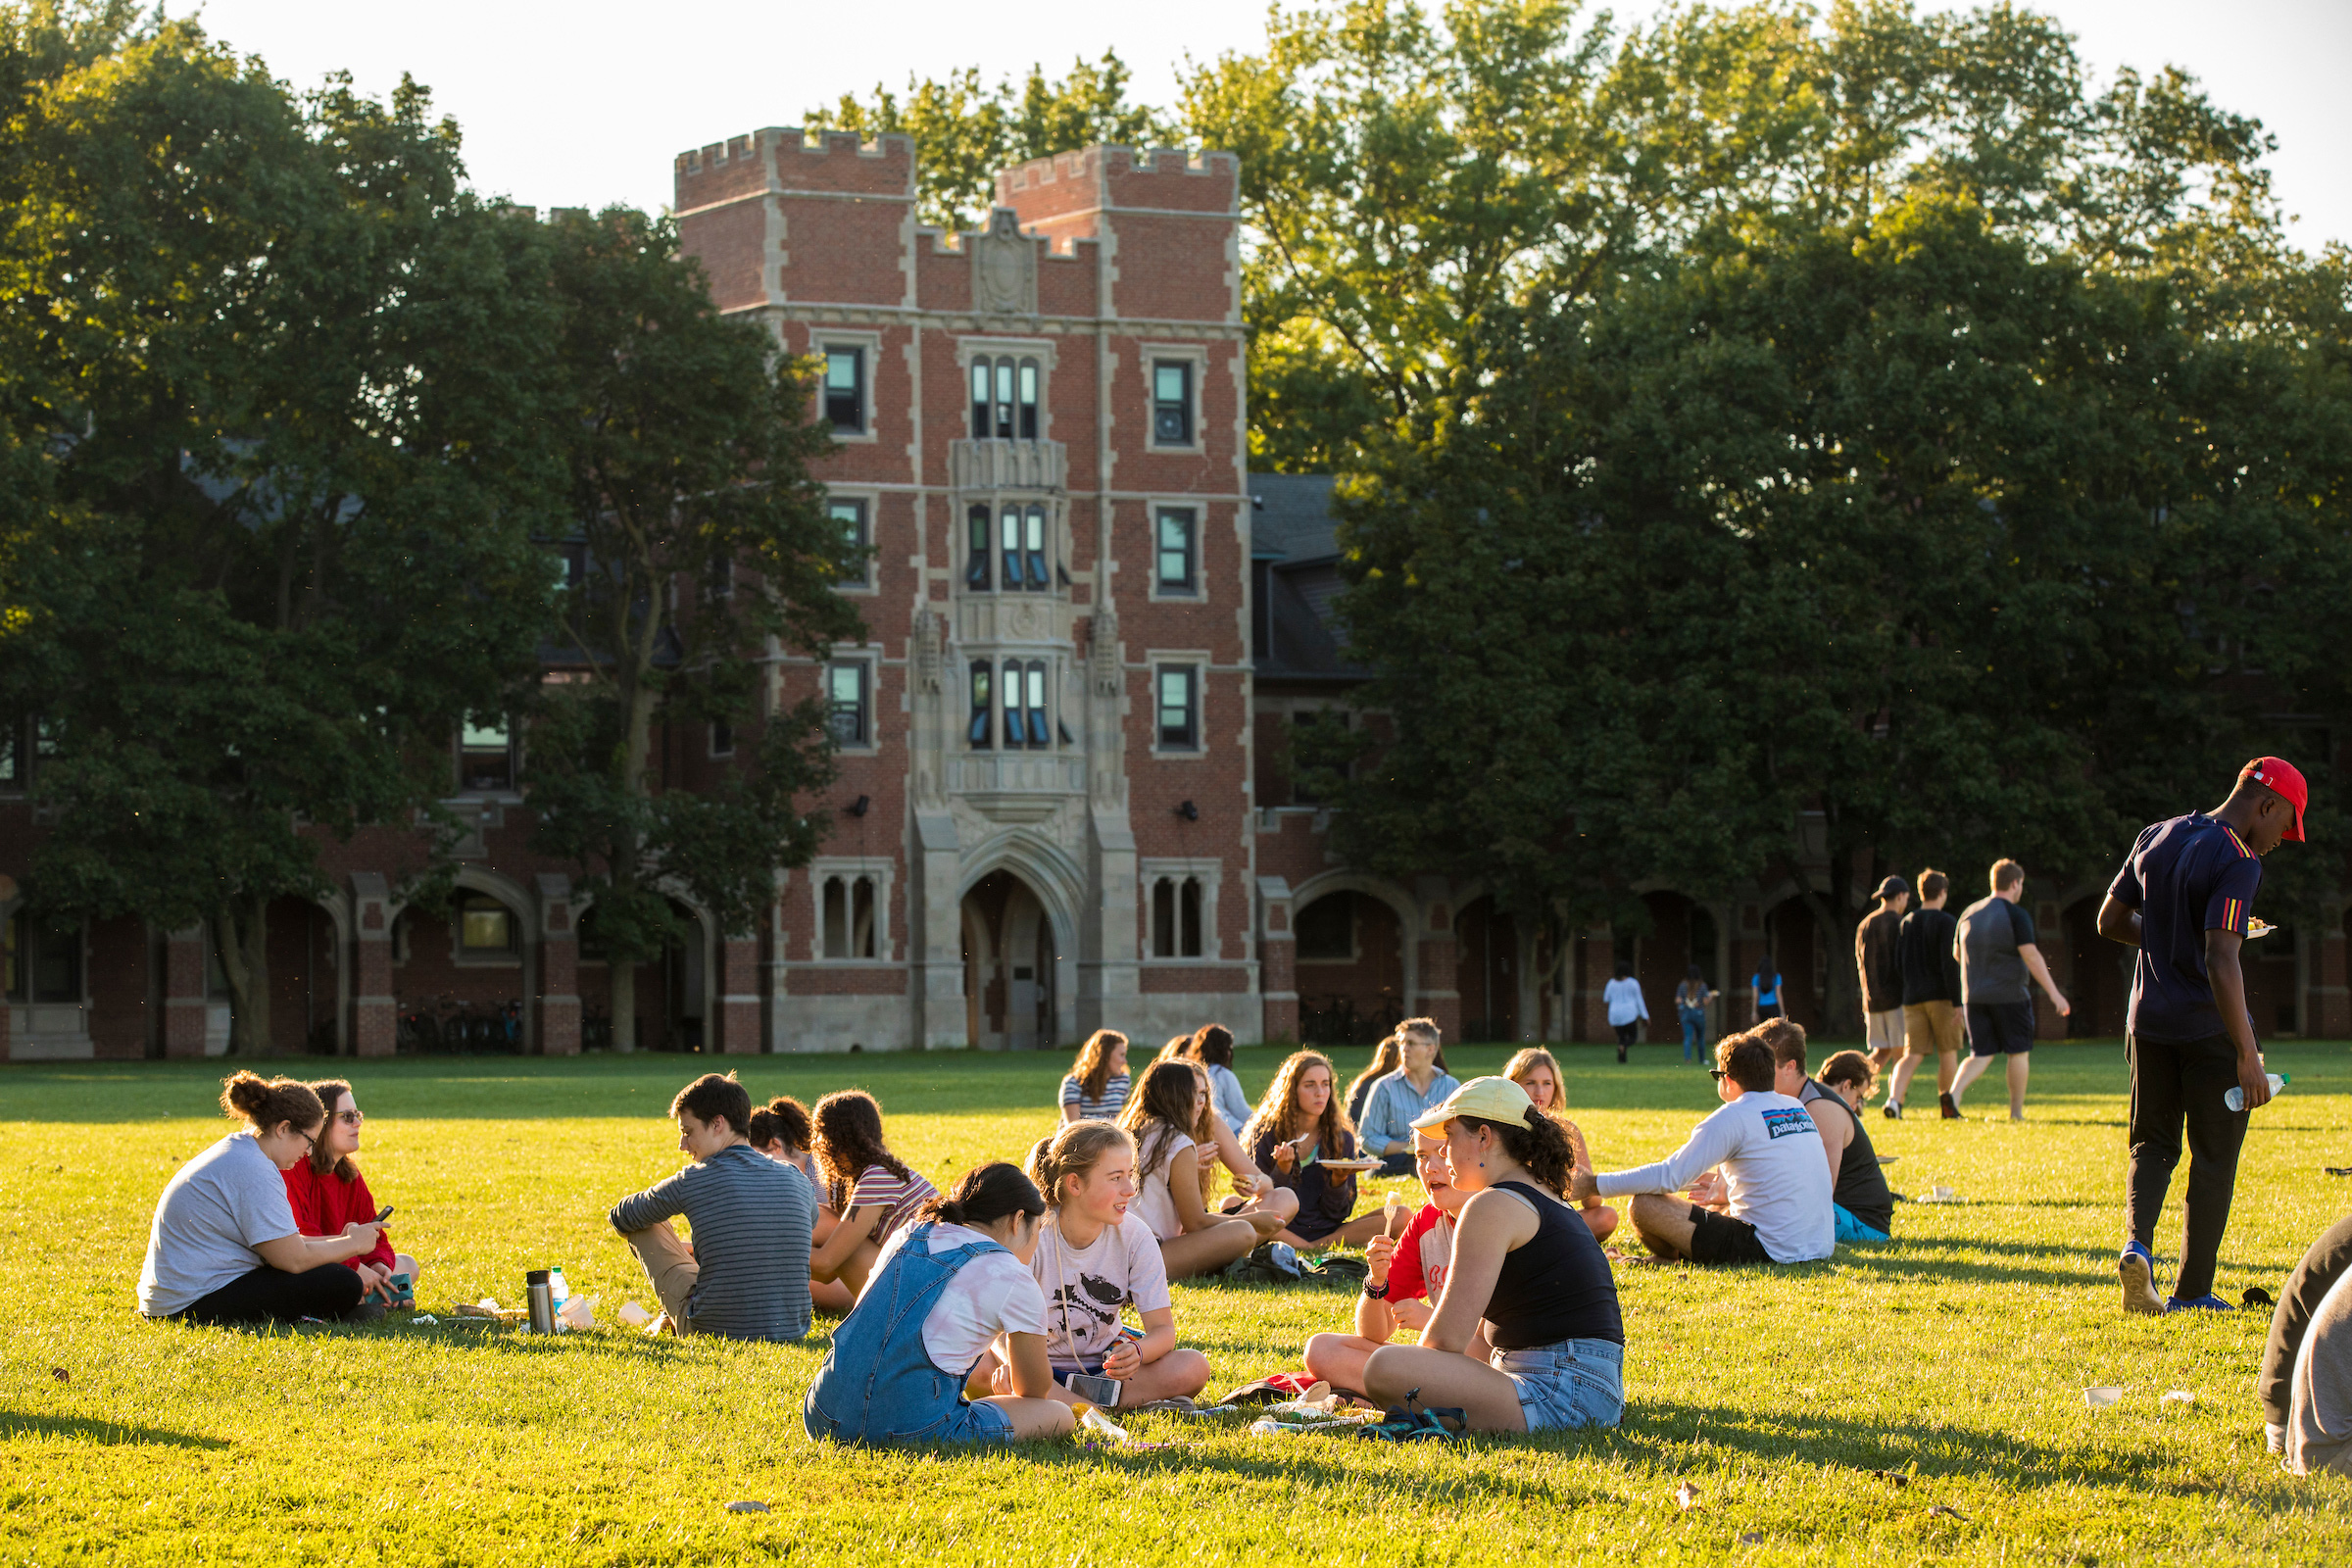 Students sit in Mac Field with Gates Tower in the background